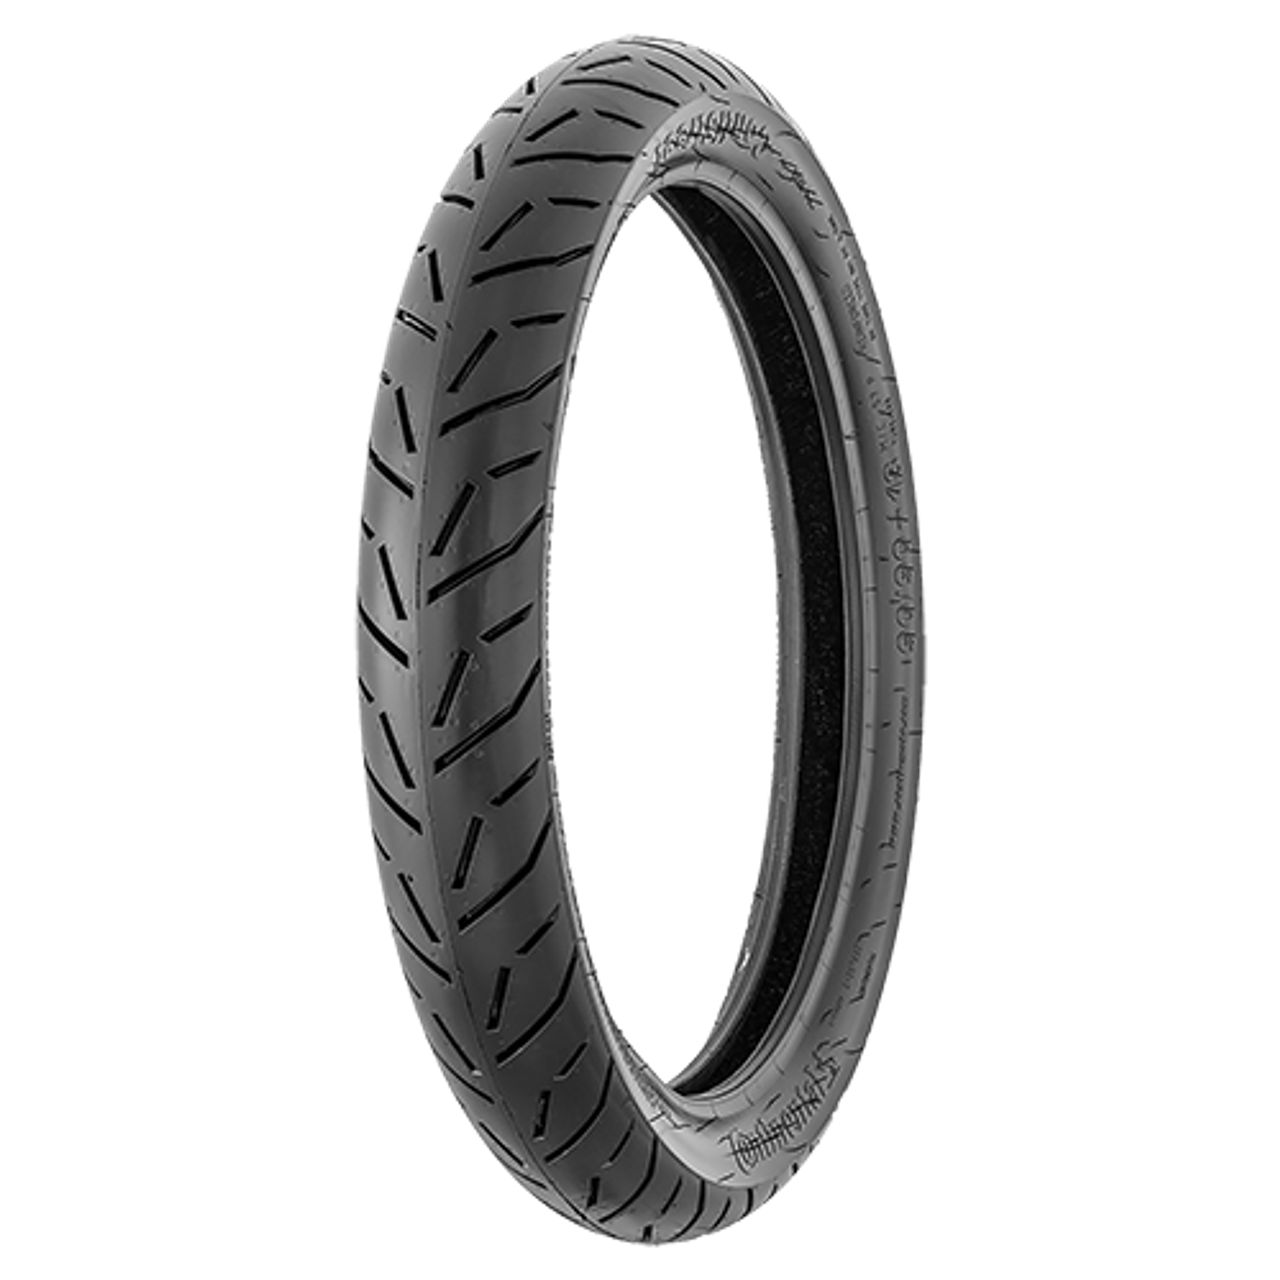 CONTINENTAL CONTISTREET 80/100 - 18 M/C TL 47P BSW FRONT